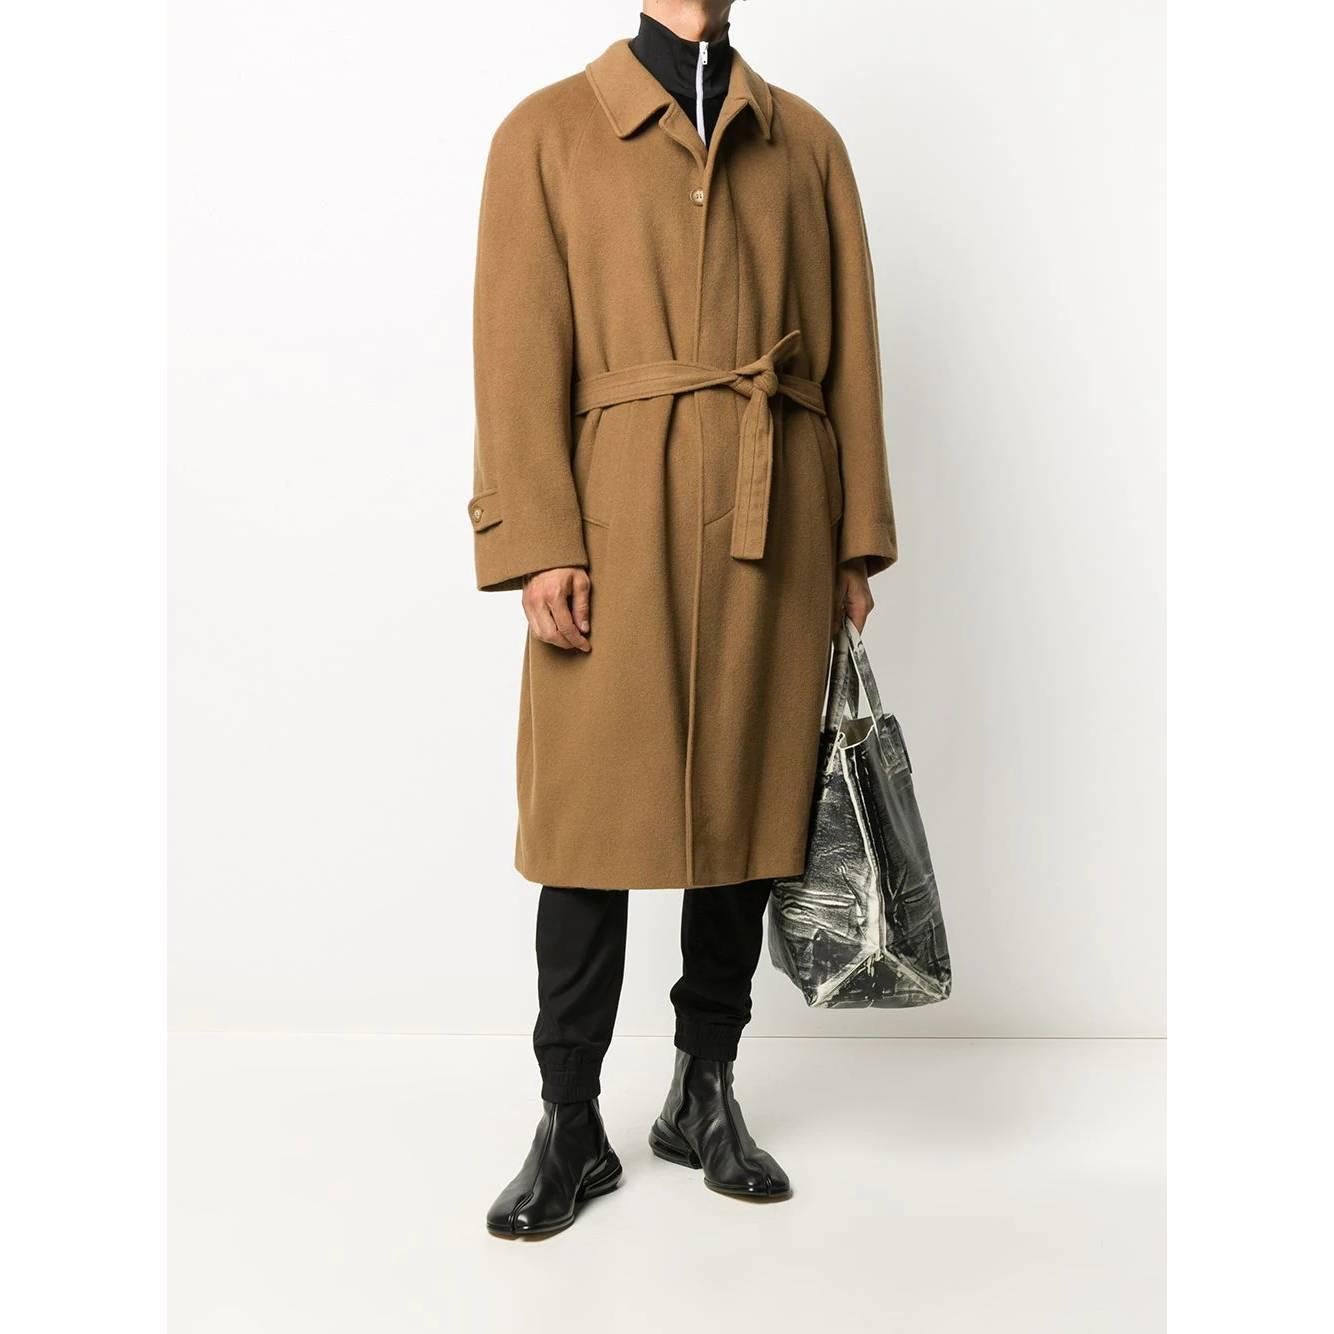 A.N.G.E.L.O. Vintage Cult hazelnut brown wool coat. It features a classic collar, concealed front button fastening and belted waist. Long sleeves, buttoned cuffs, side flap pockets and central rear vent. Fully lined.

Size: 50 IT/FR

Flat